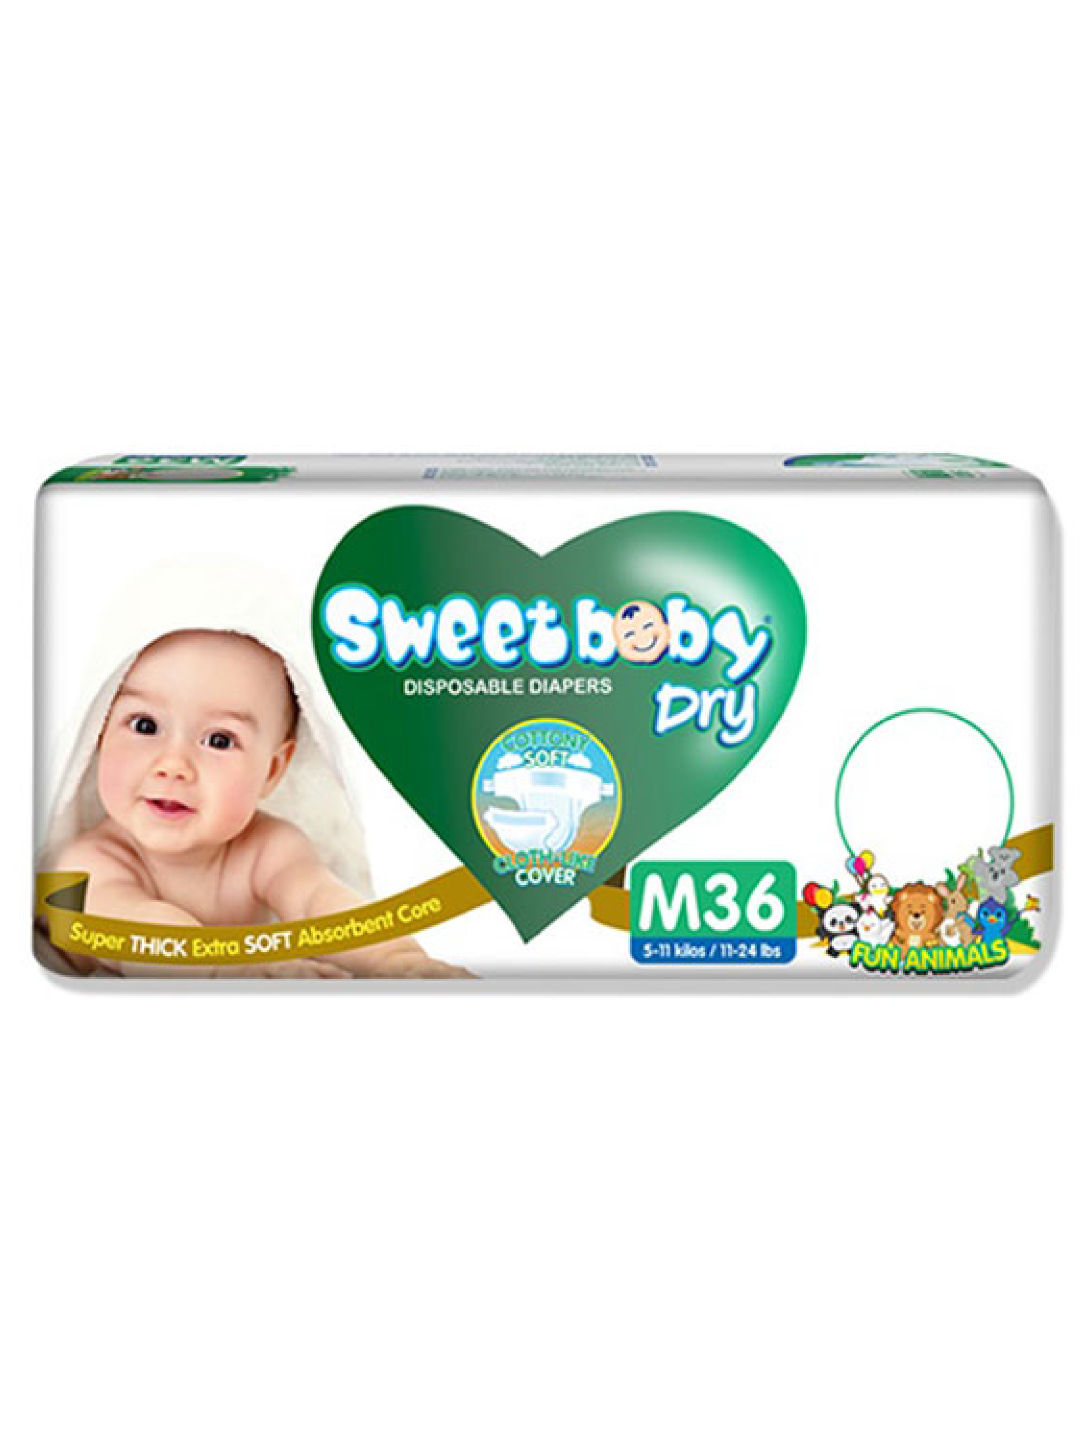 Sweetbaby Dry Disposable Diapers Medium Econo pack  (36s)